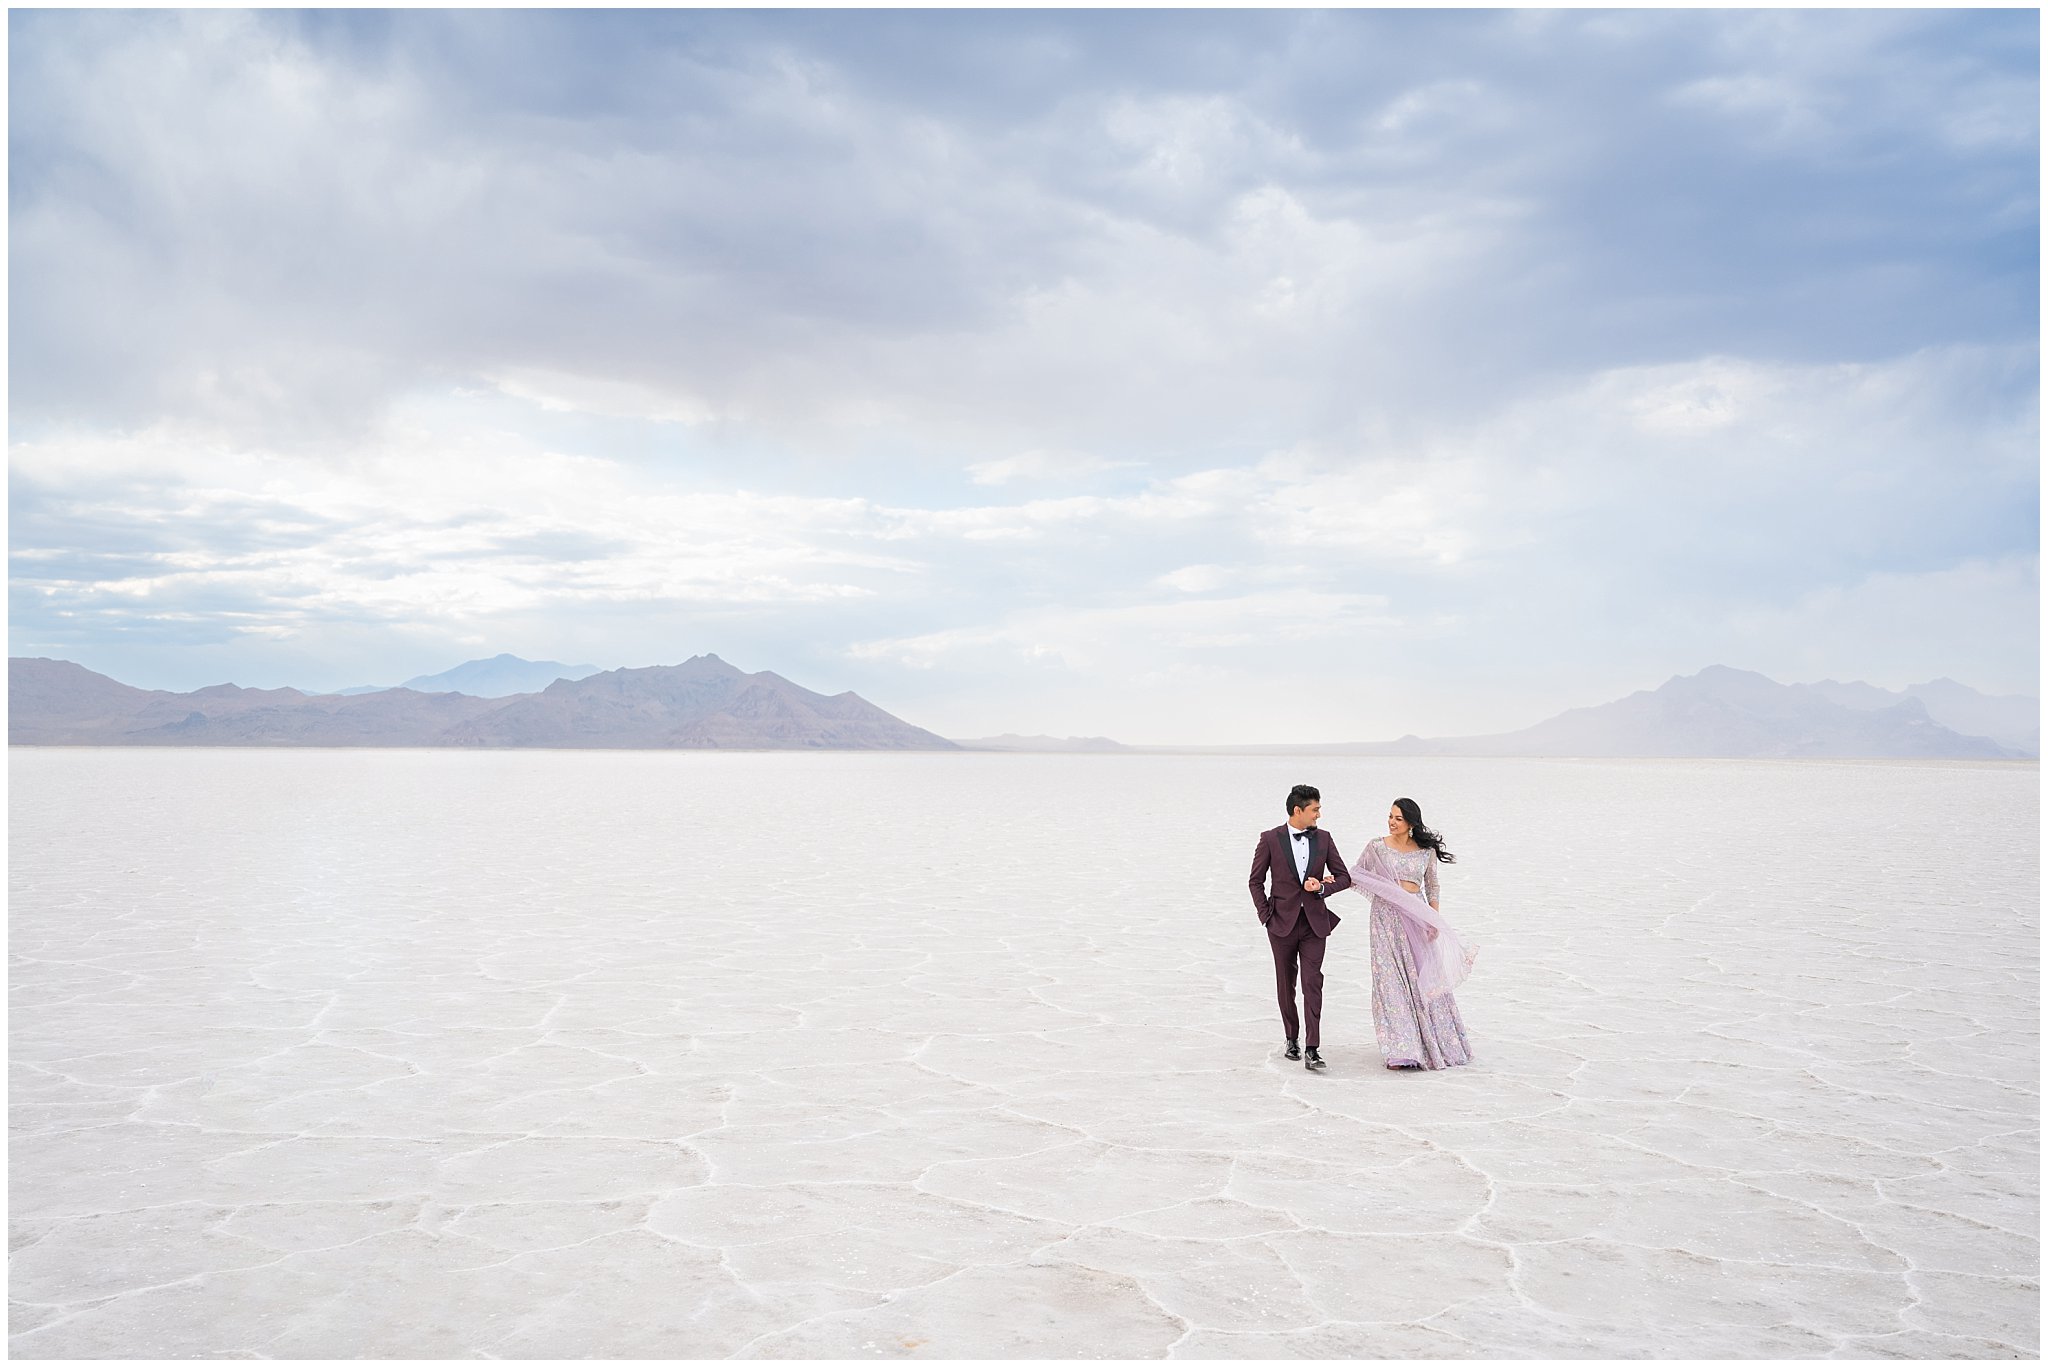 Couple walking together during their Indian wedding session at the Bonneville Salt Flats